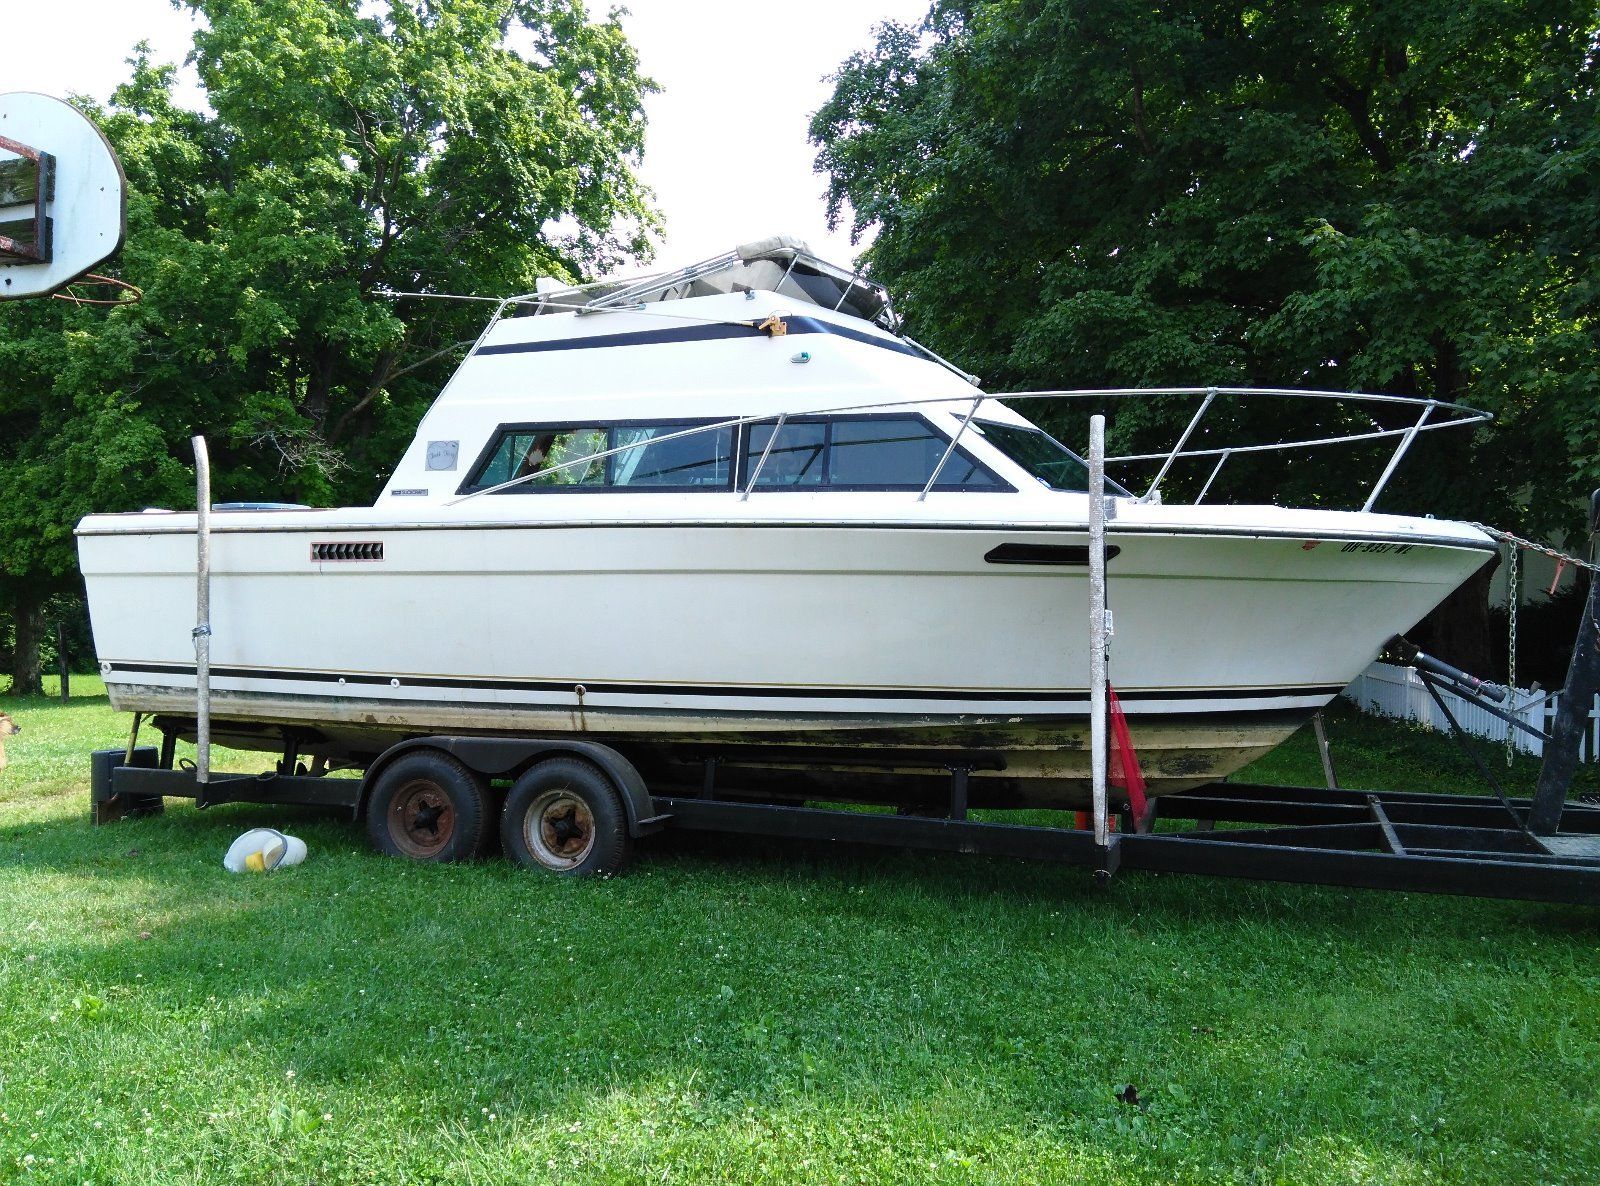 AMF Slickcraft 1979 for sale for $3,000 - Boats-from-USA.com